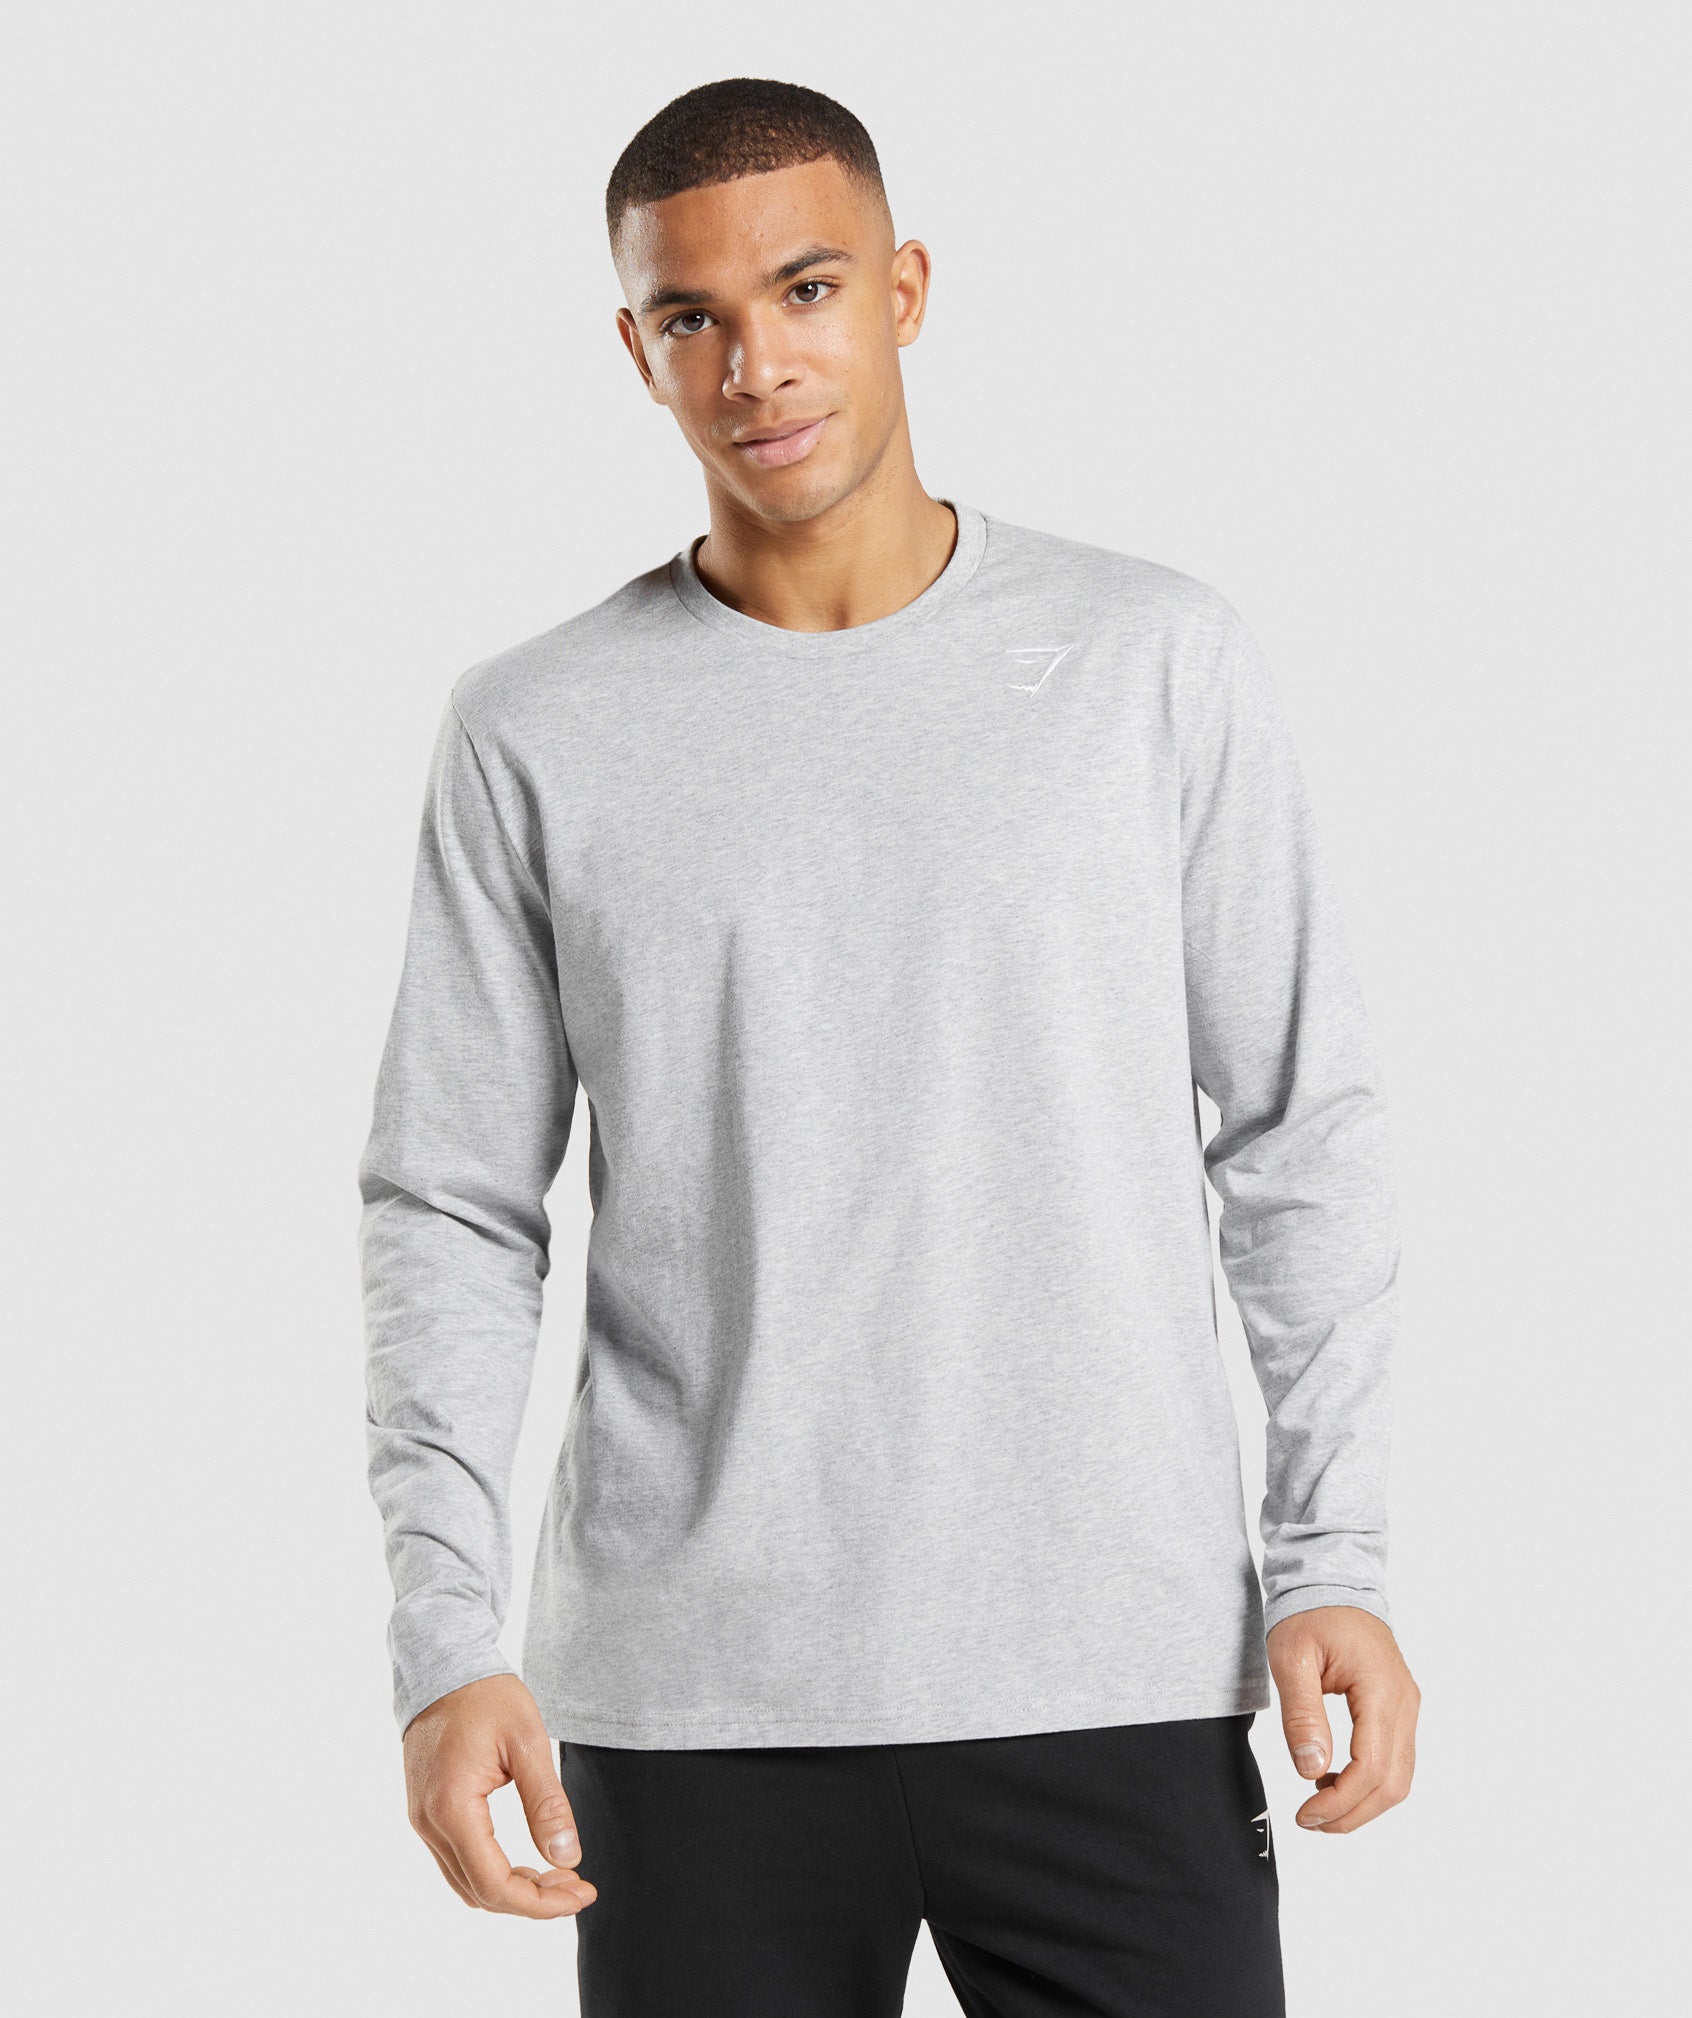 Crest Long Sleeve T-Shirt in Light Grey Core Marl - view 1